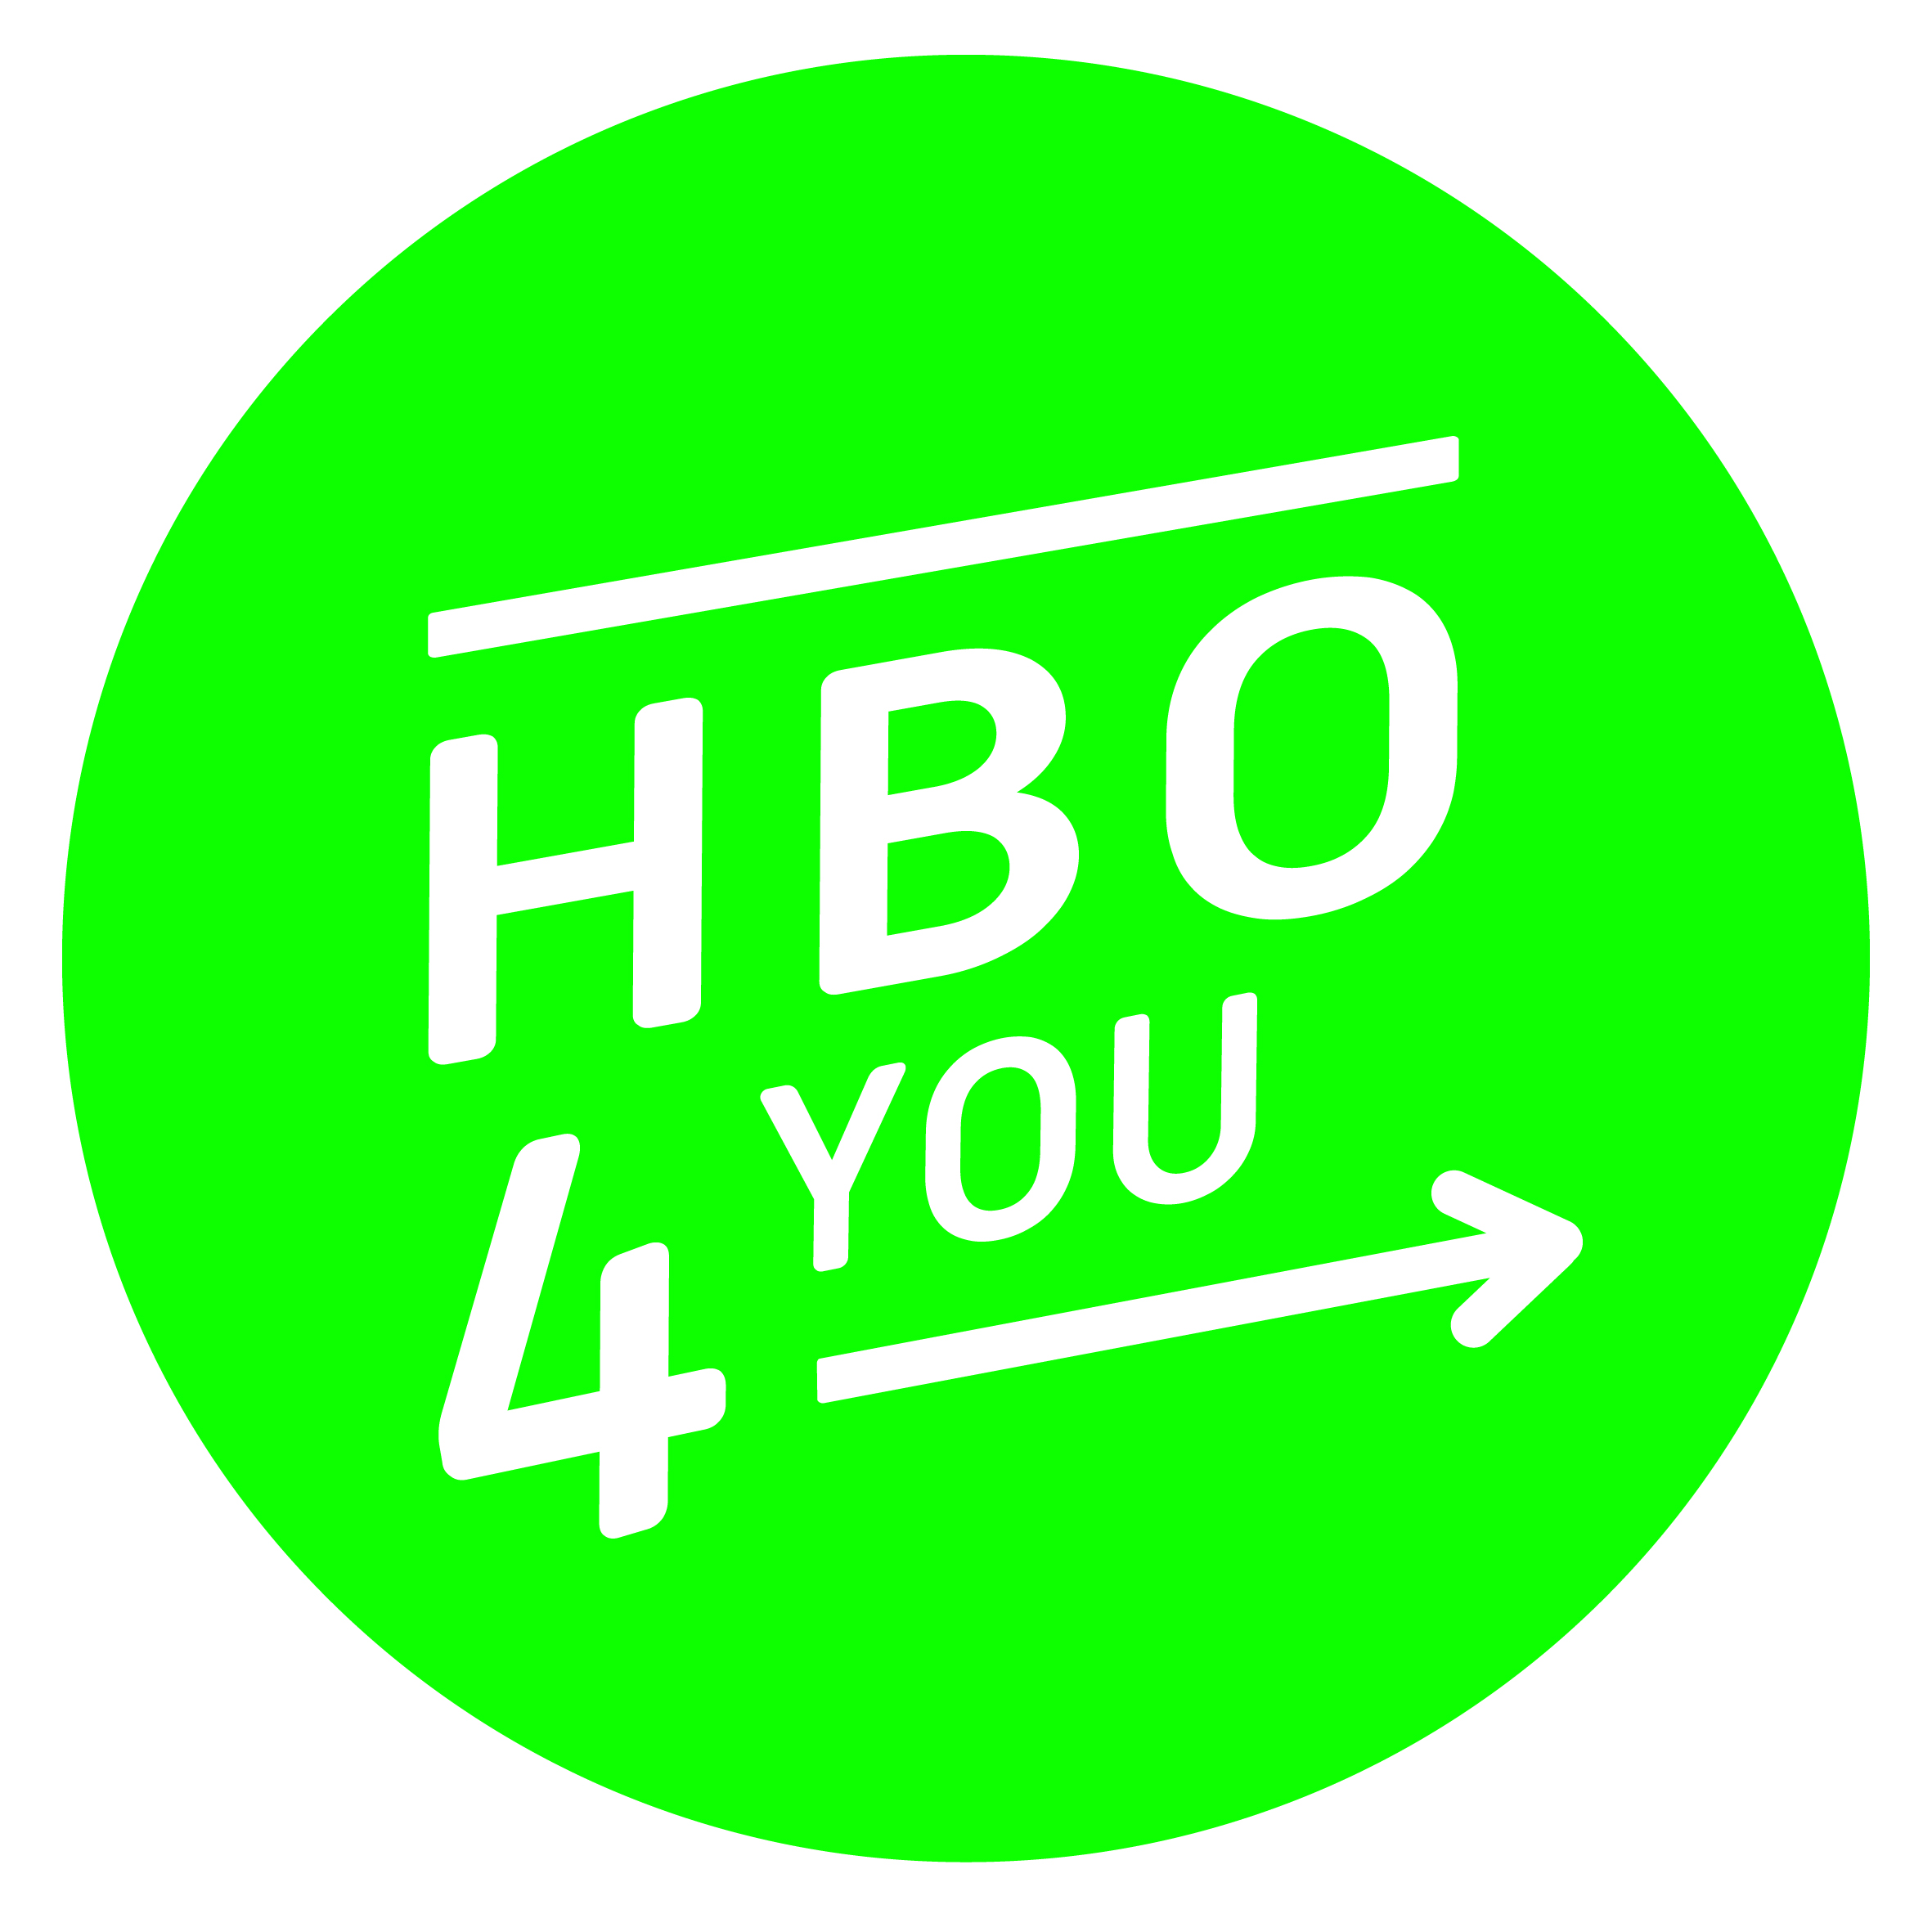 Hbo4you